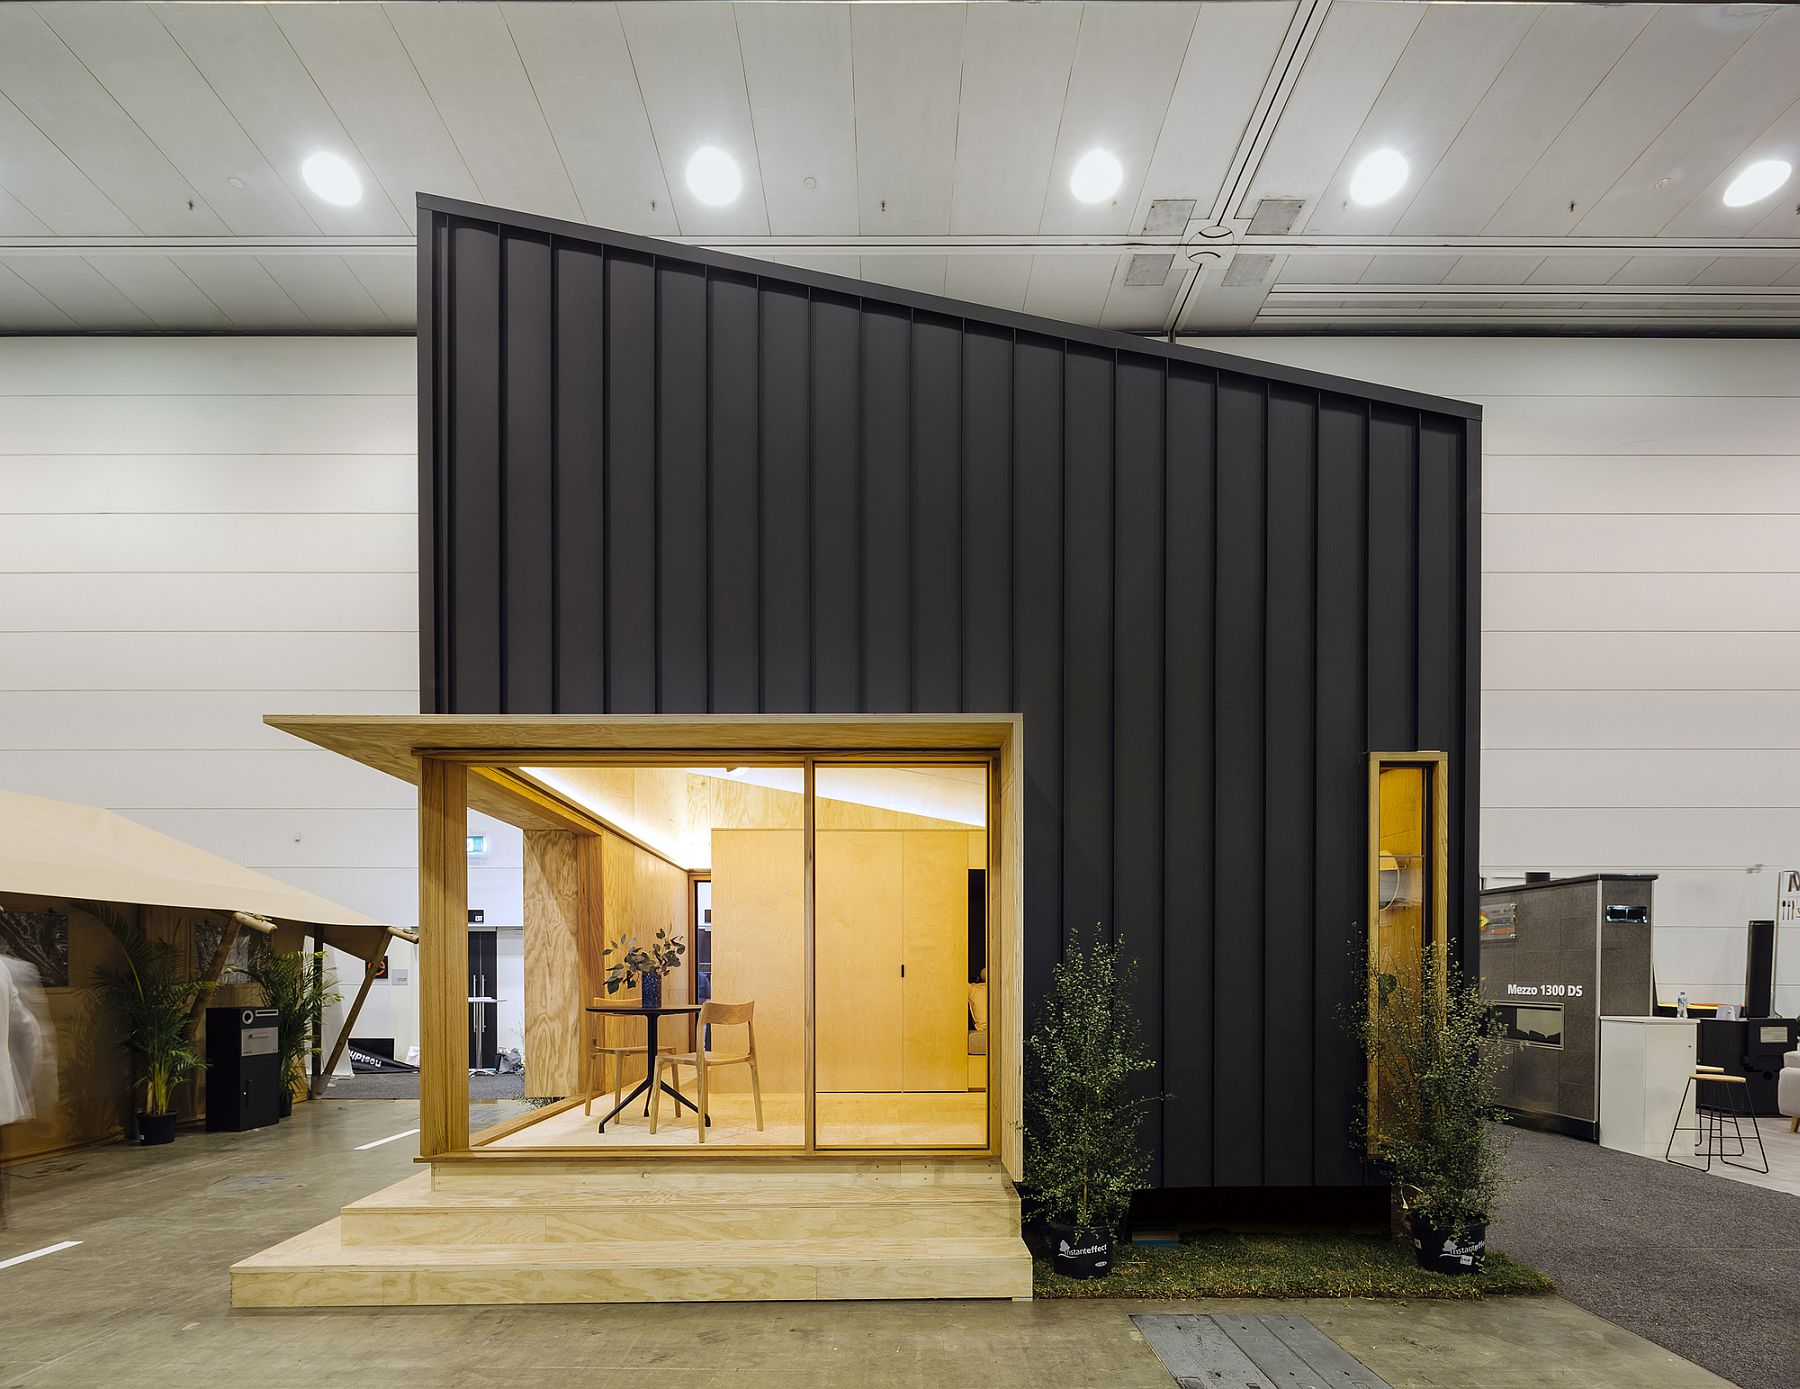 Metal-panels-and-angled-roof-shape-the-exterior-of-this-tiny-sustainable-home